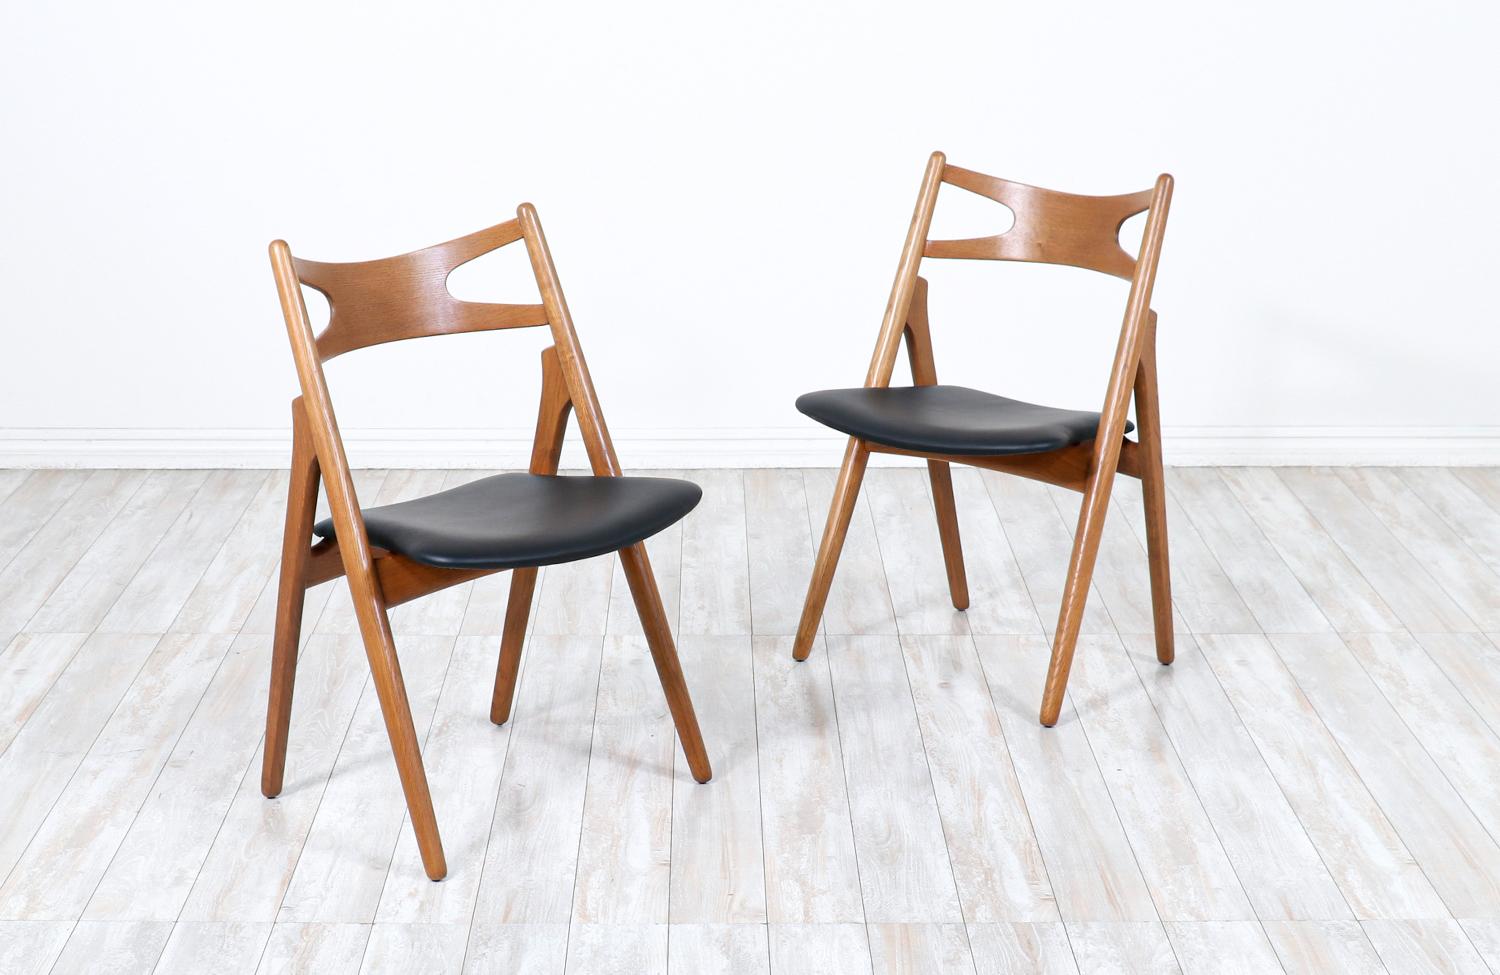 Price is for each

Iconic “Sawbuck” CH-29 Desk Side designed by Hans J. Wegner for Carl Hansen & Søn in Denmark in 1952. This chair is defined by its A-shaped frame which can be seen from the profile view. This chair is sturdily but simply